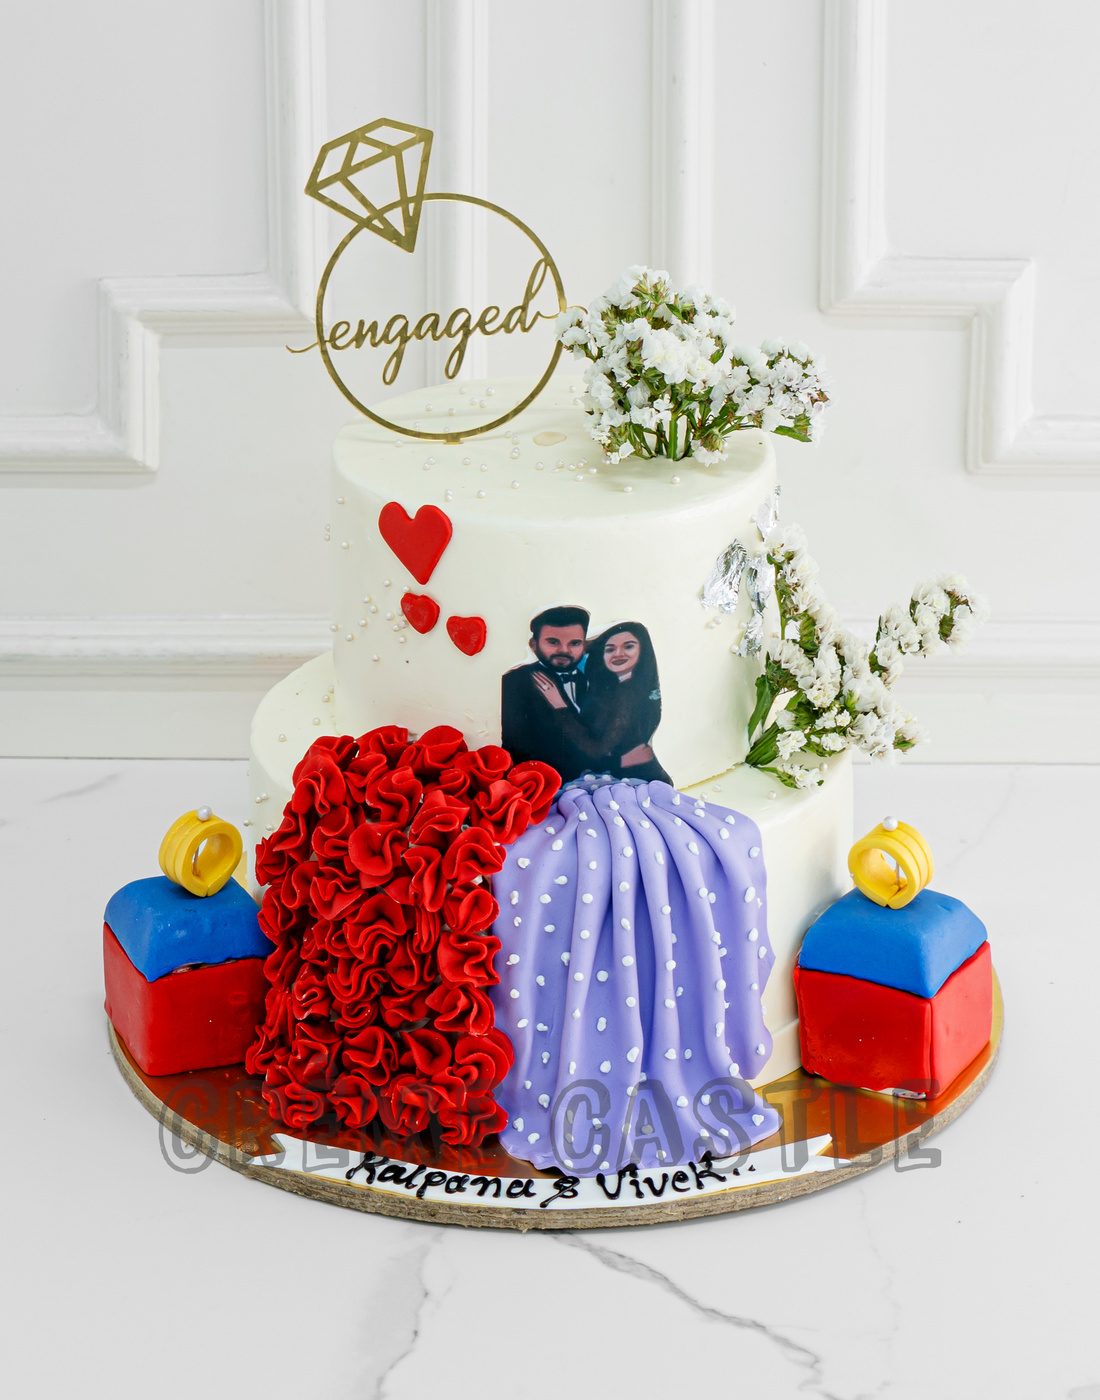 Valentine special Lovely Couple cake design|| Cute couple design cake ideas  -Crazy about Fashion. - YouTube